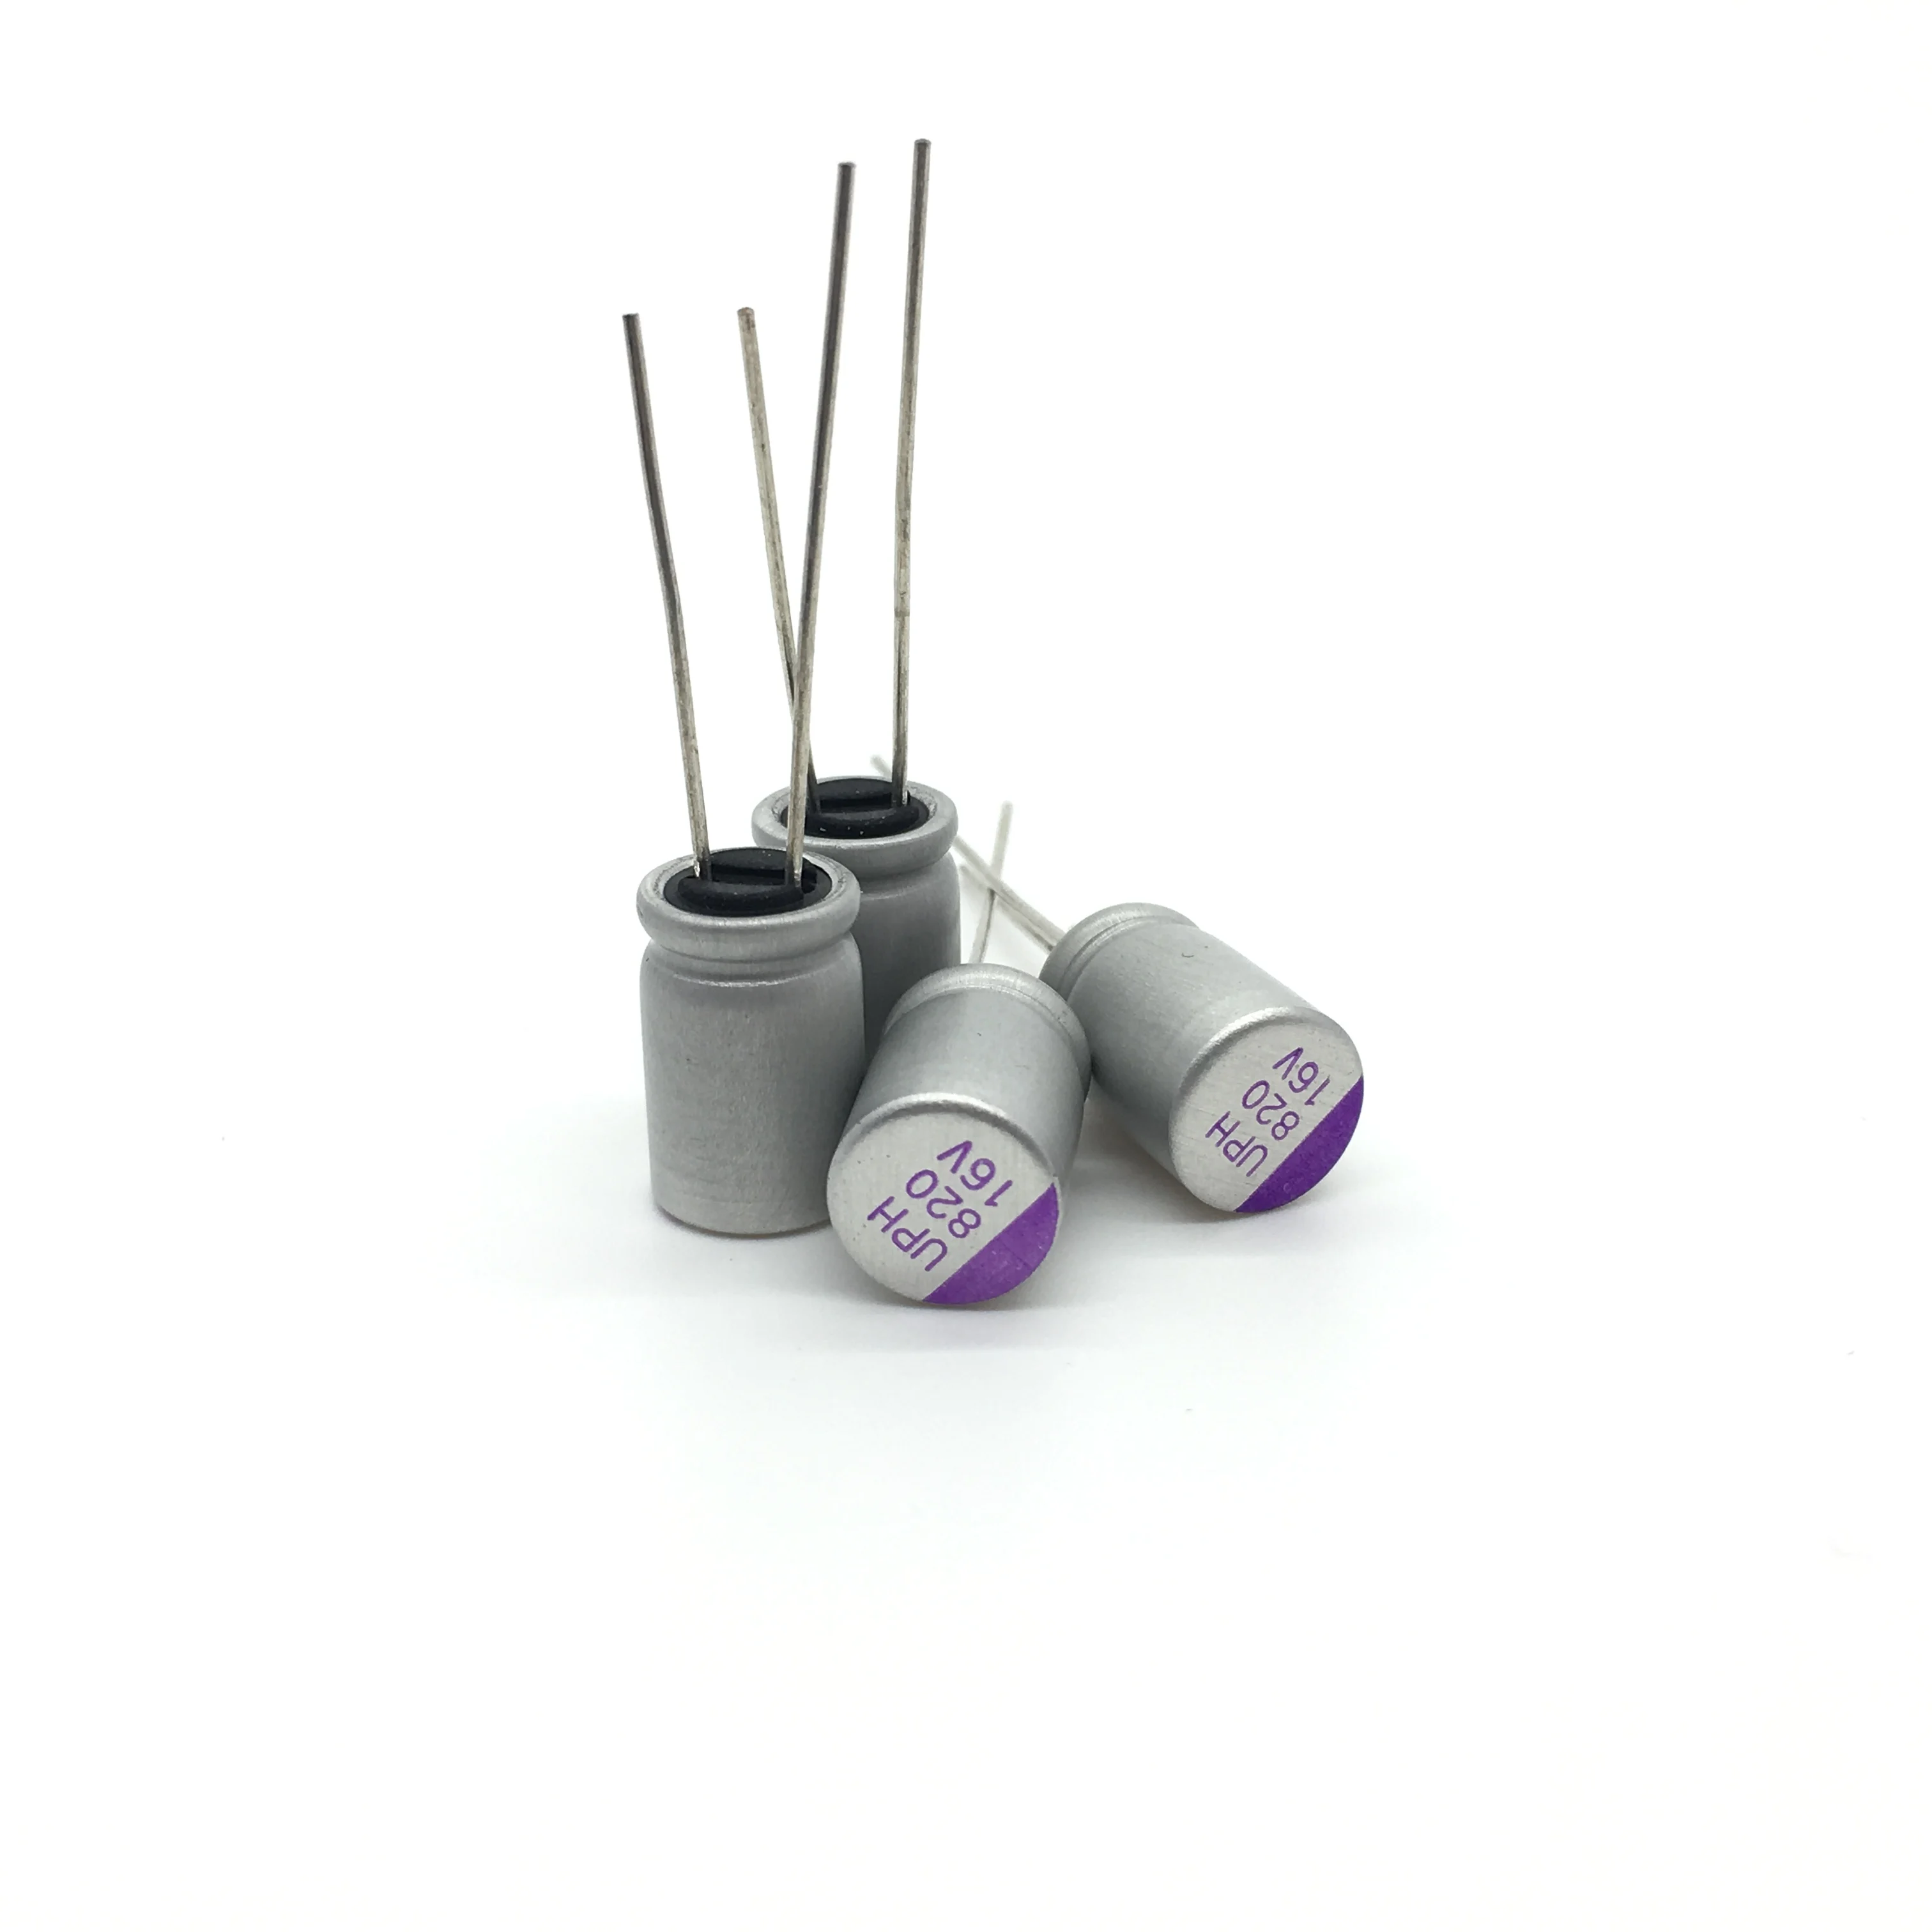 200pcs 16v820uf Conductive Polymer Aluminum Solid Electrolytic Capacitors Radial Type, High Voltage, Low ESR -55~+125 2,000hrs